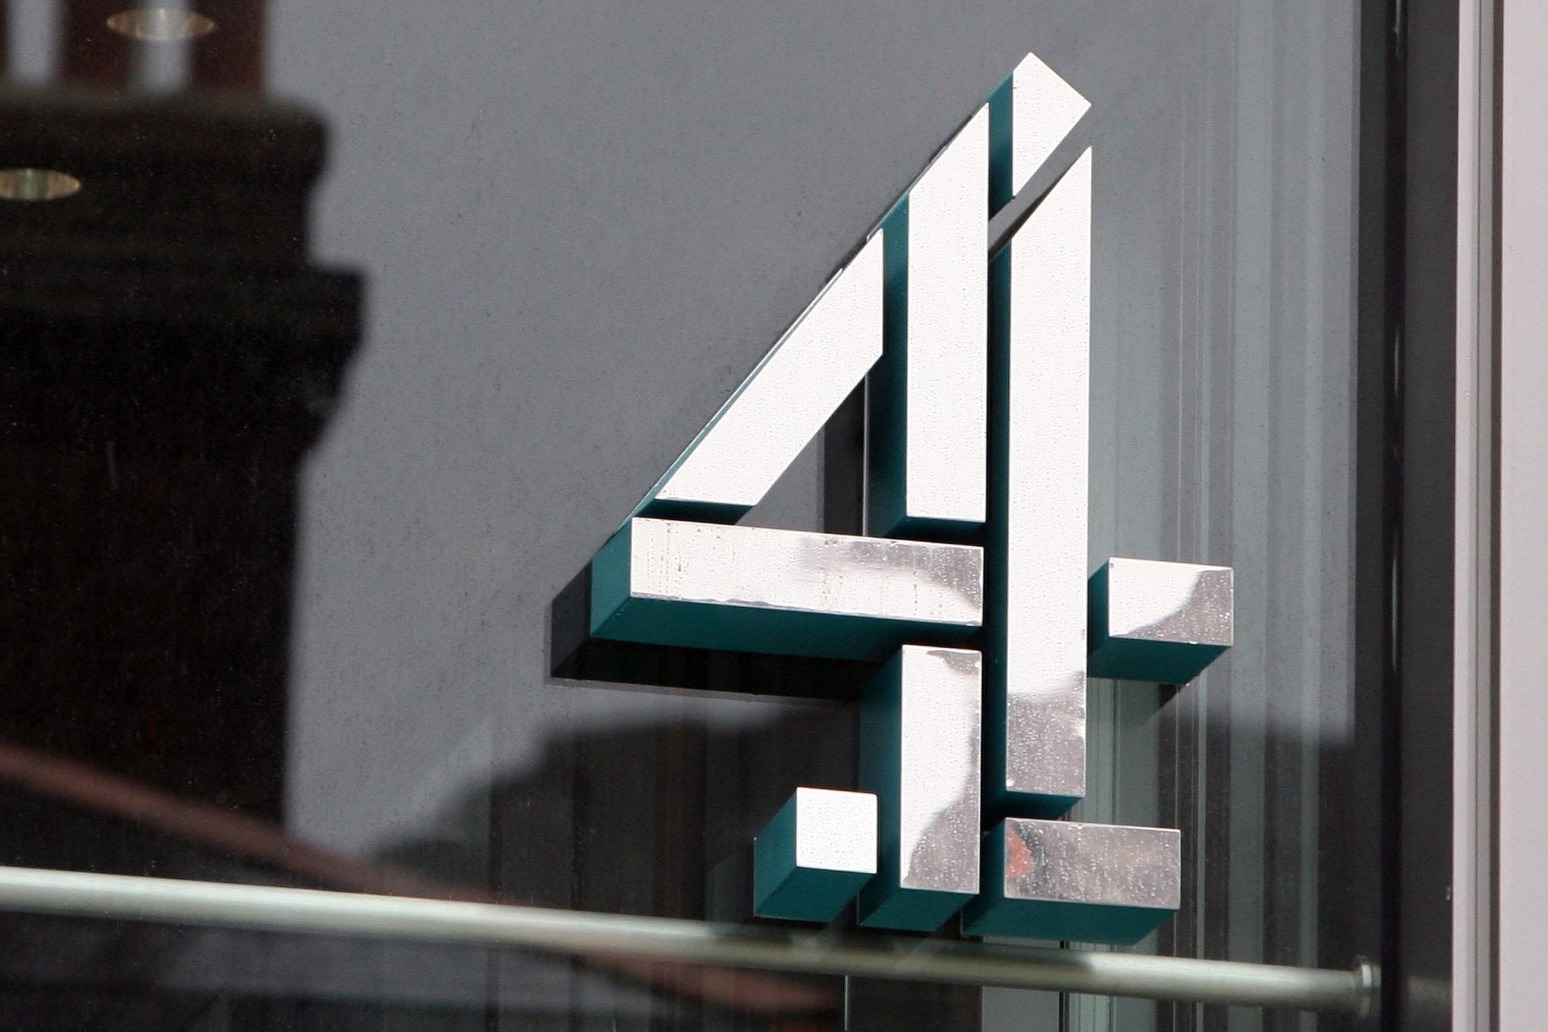 Media Bill to give Channel 4 ‘tools it needs to succeed in the future’ 